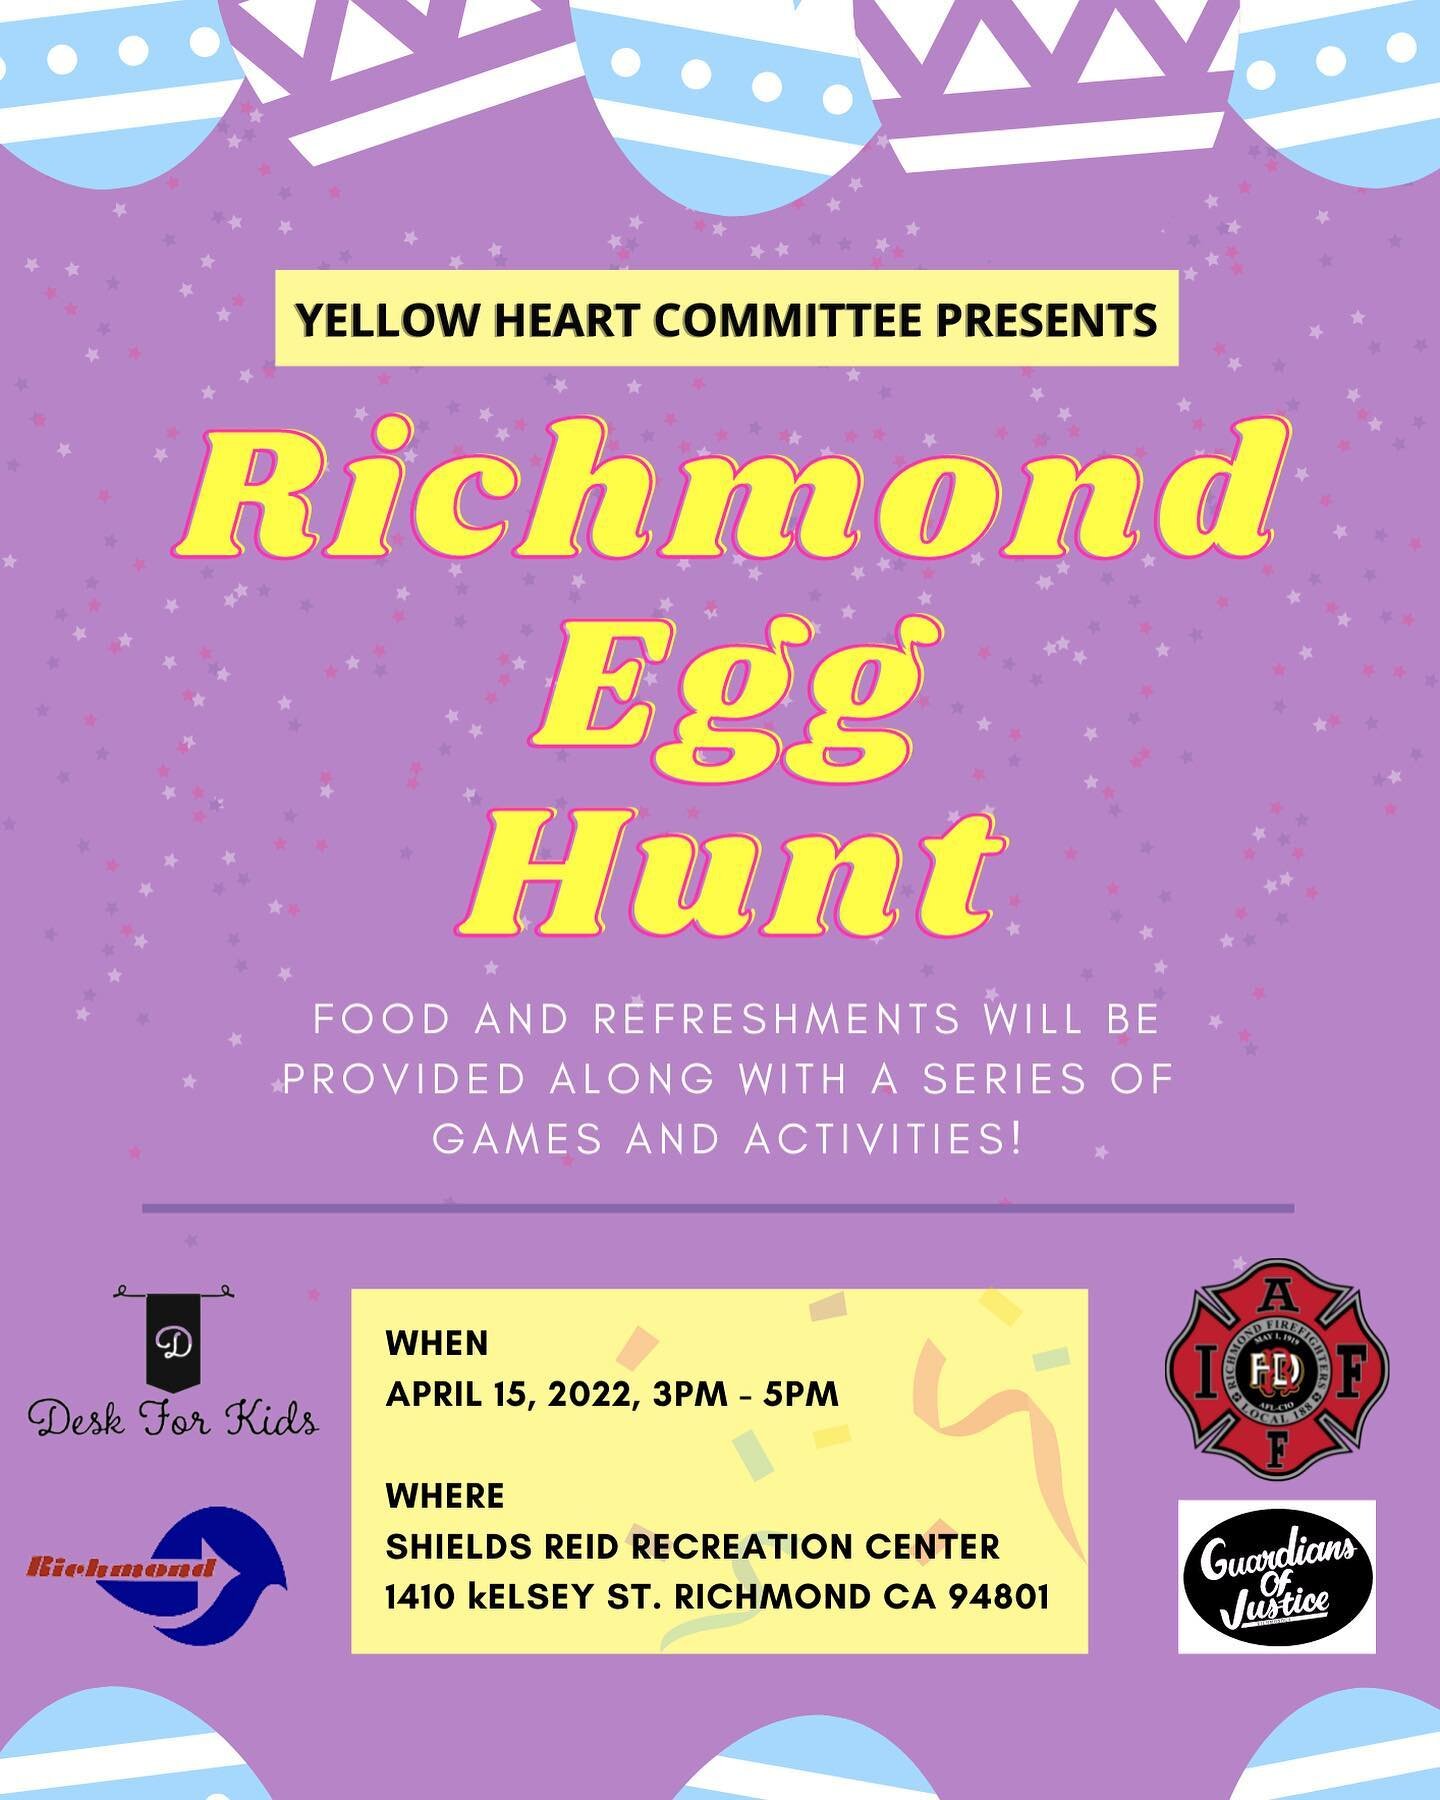 It&rsquo;s time we announced a special surprise from us to you!  Our YHC egg hunt is gonna be a blast 💛🥚🎉 Food &amp; refreshments will be provided along with a series of other fun activities/games! We&rsquo;re hosting this in collaboration with ot